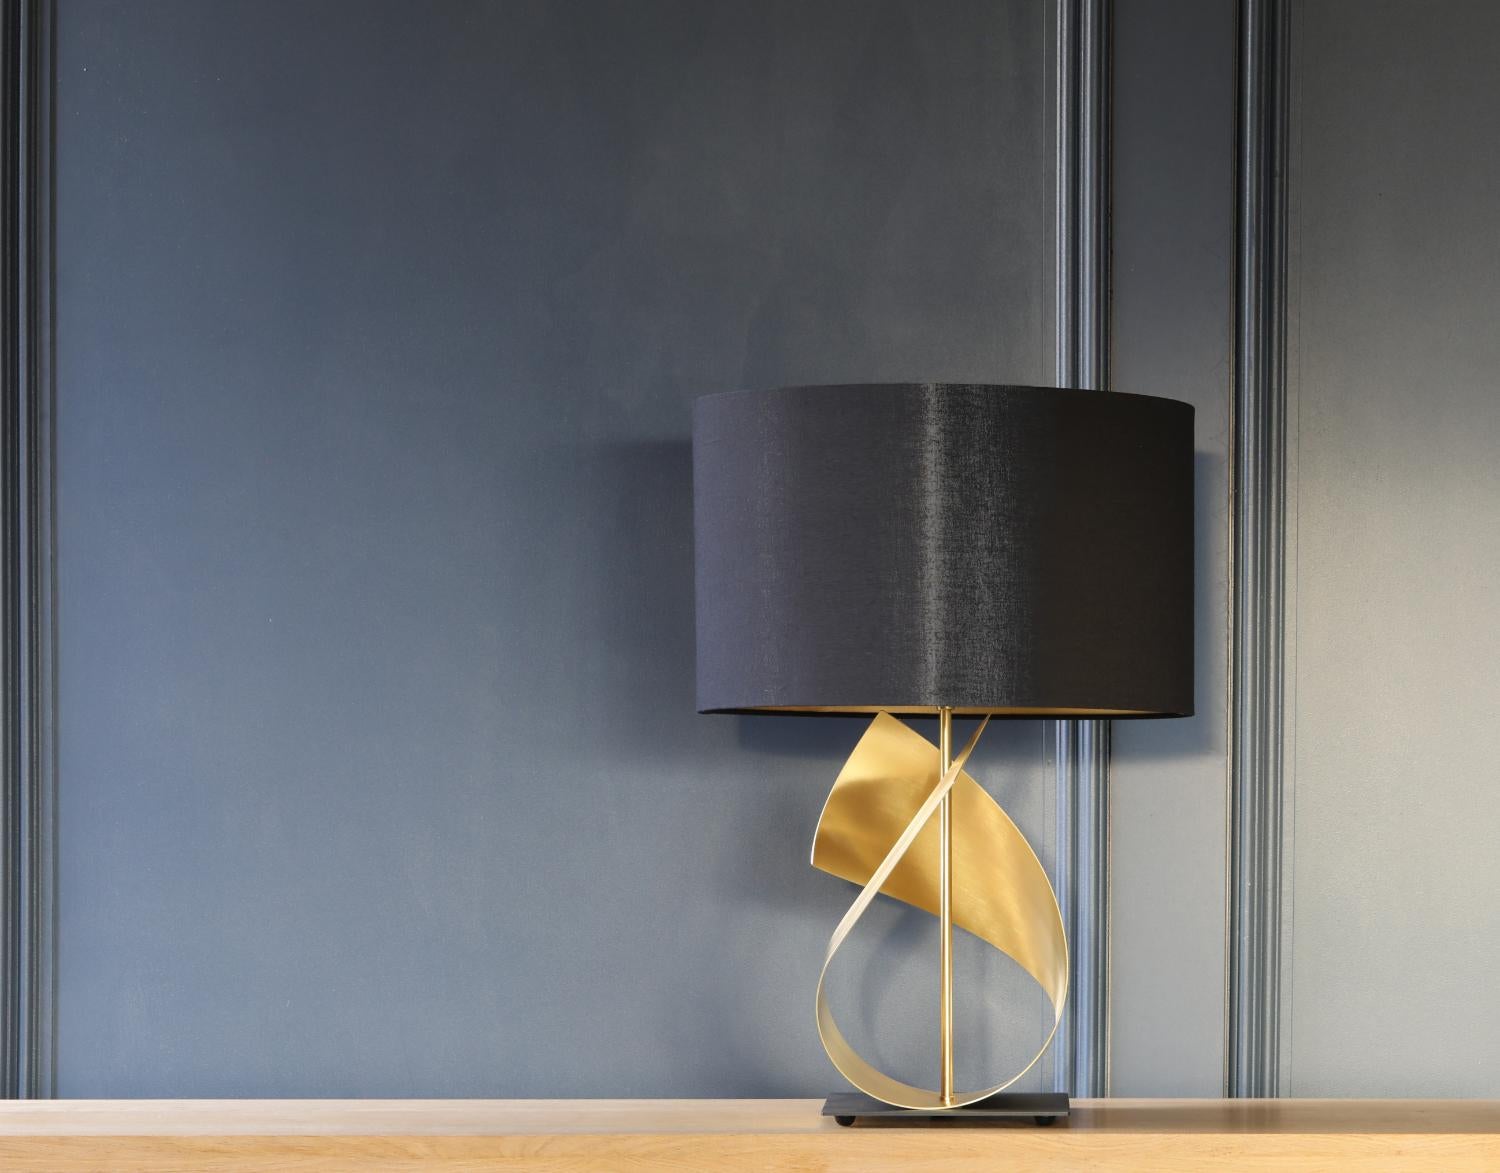 The FLUX is a beautiful, sculptural table lamp, featuring our trade mark sweeping curves in luxurious brushed brass. It is not only a stylish and contemporary light but also a piece of art.

This stunning table lamp makes a statement on its own or